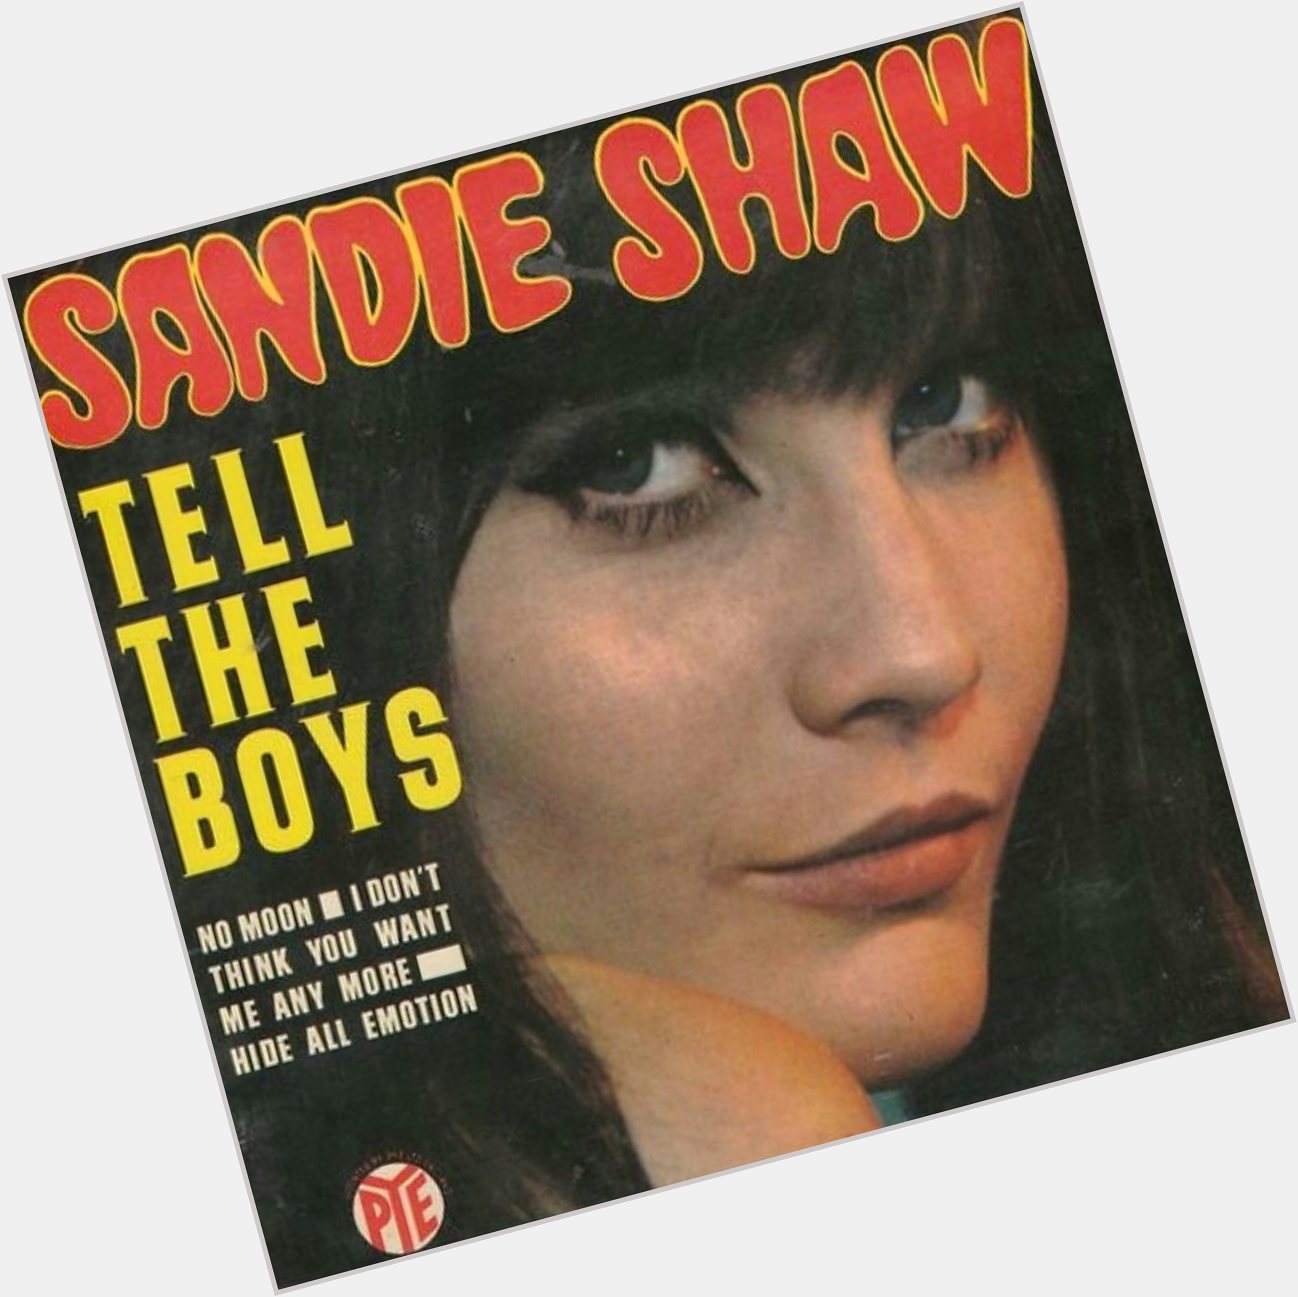 A very happy birthday to Sandie Shaw, born today in 1947. 